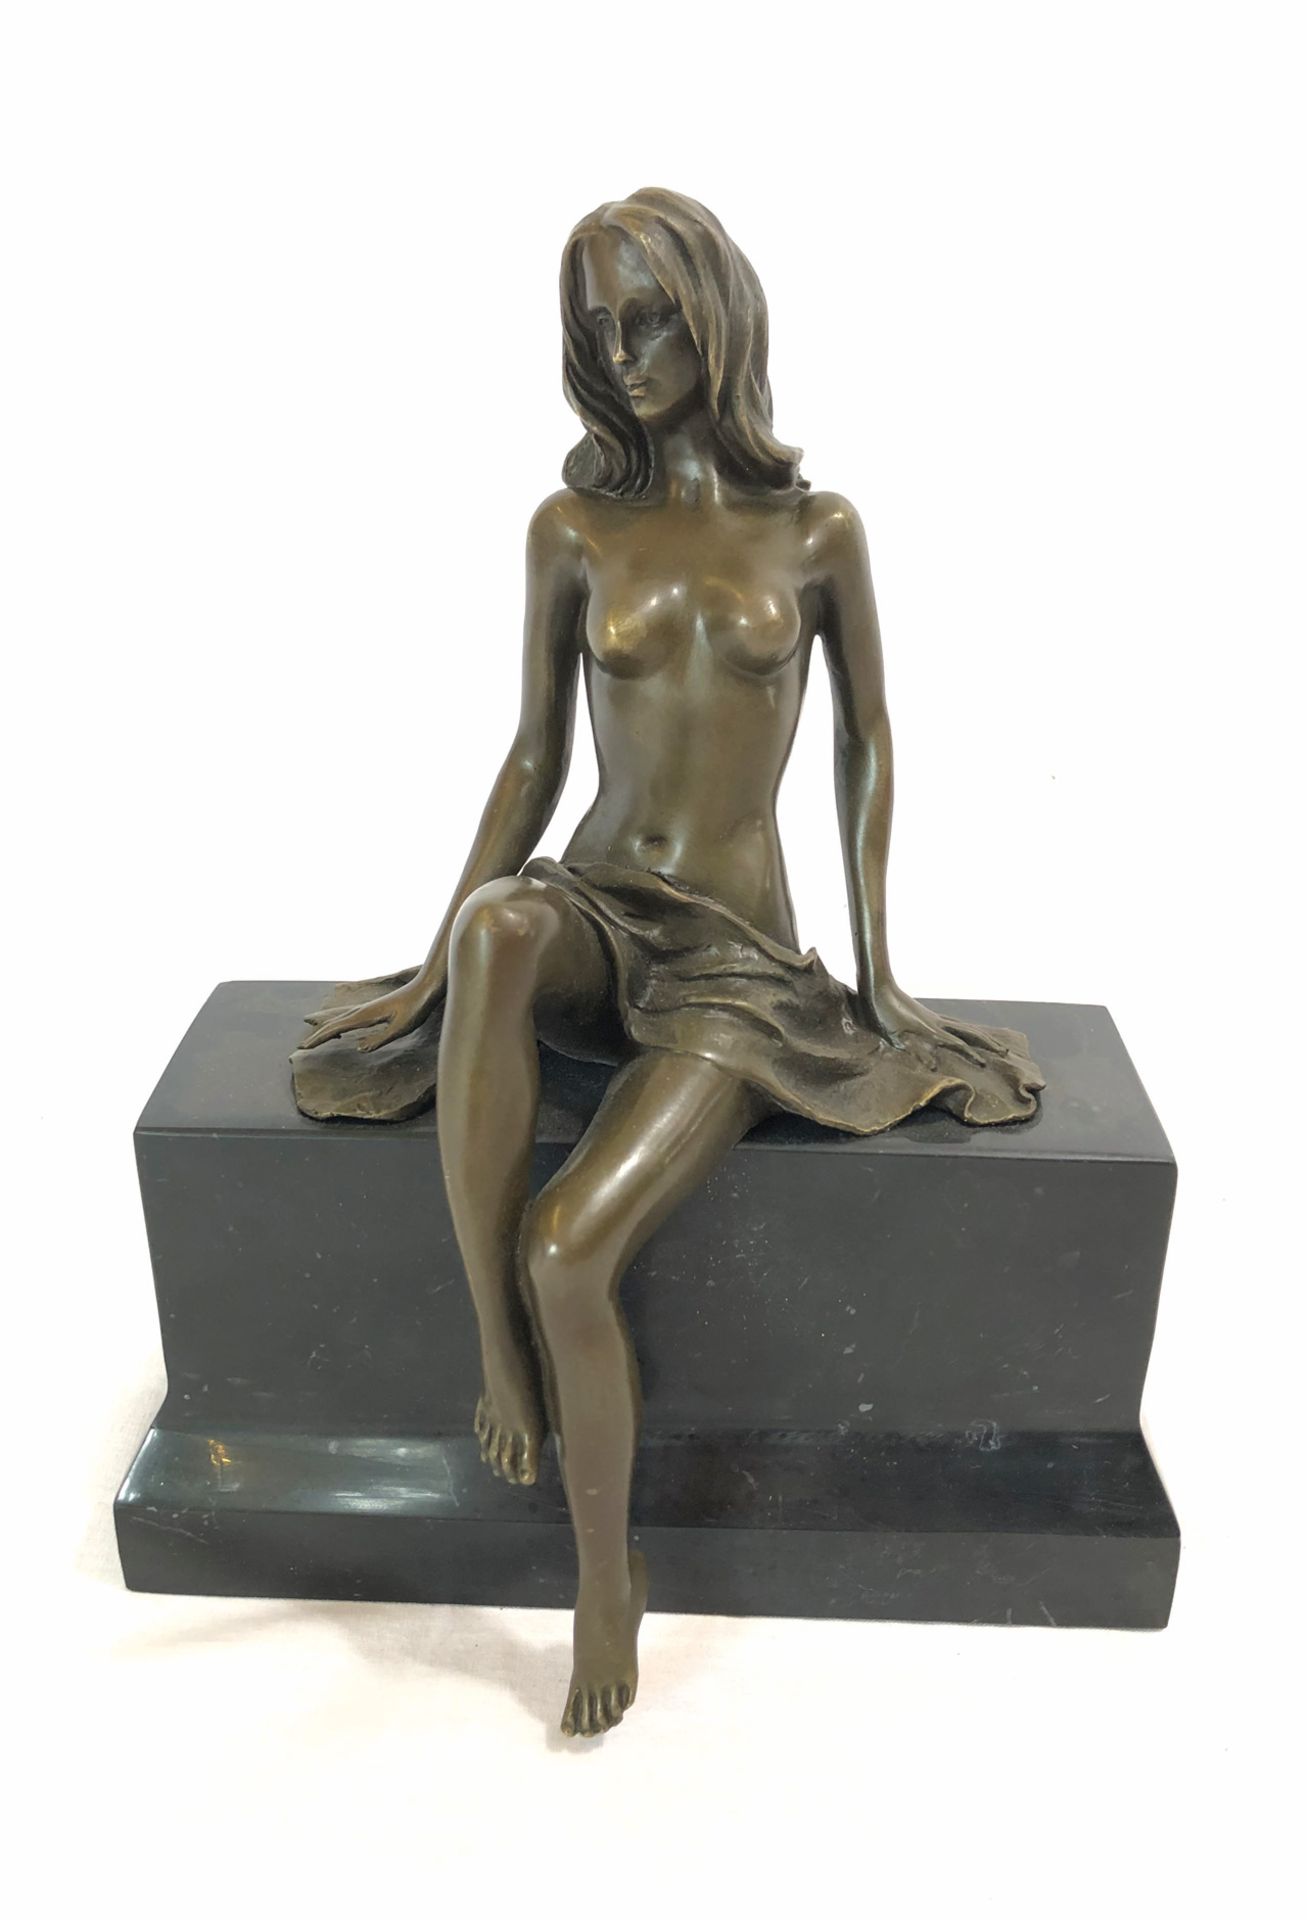 Bronze statue of a woman by artist Claude